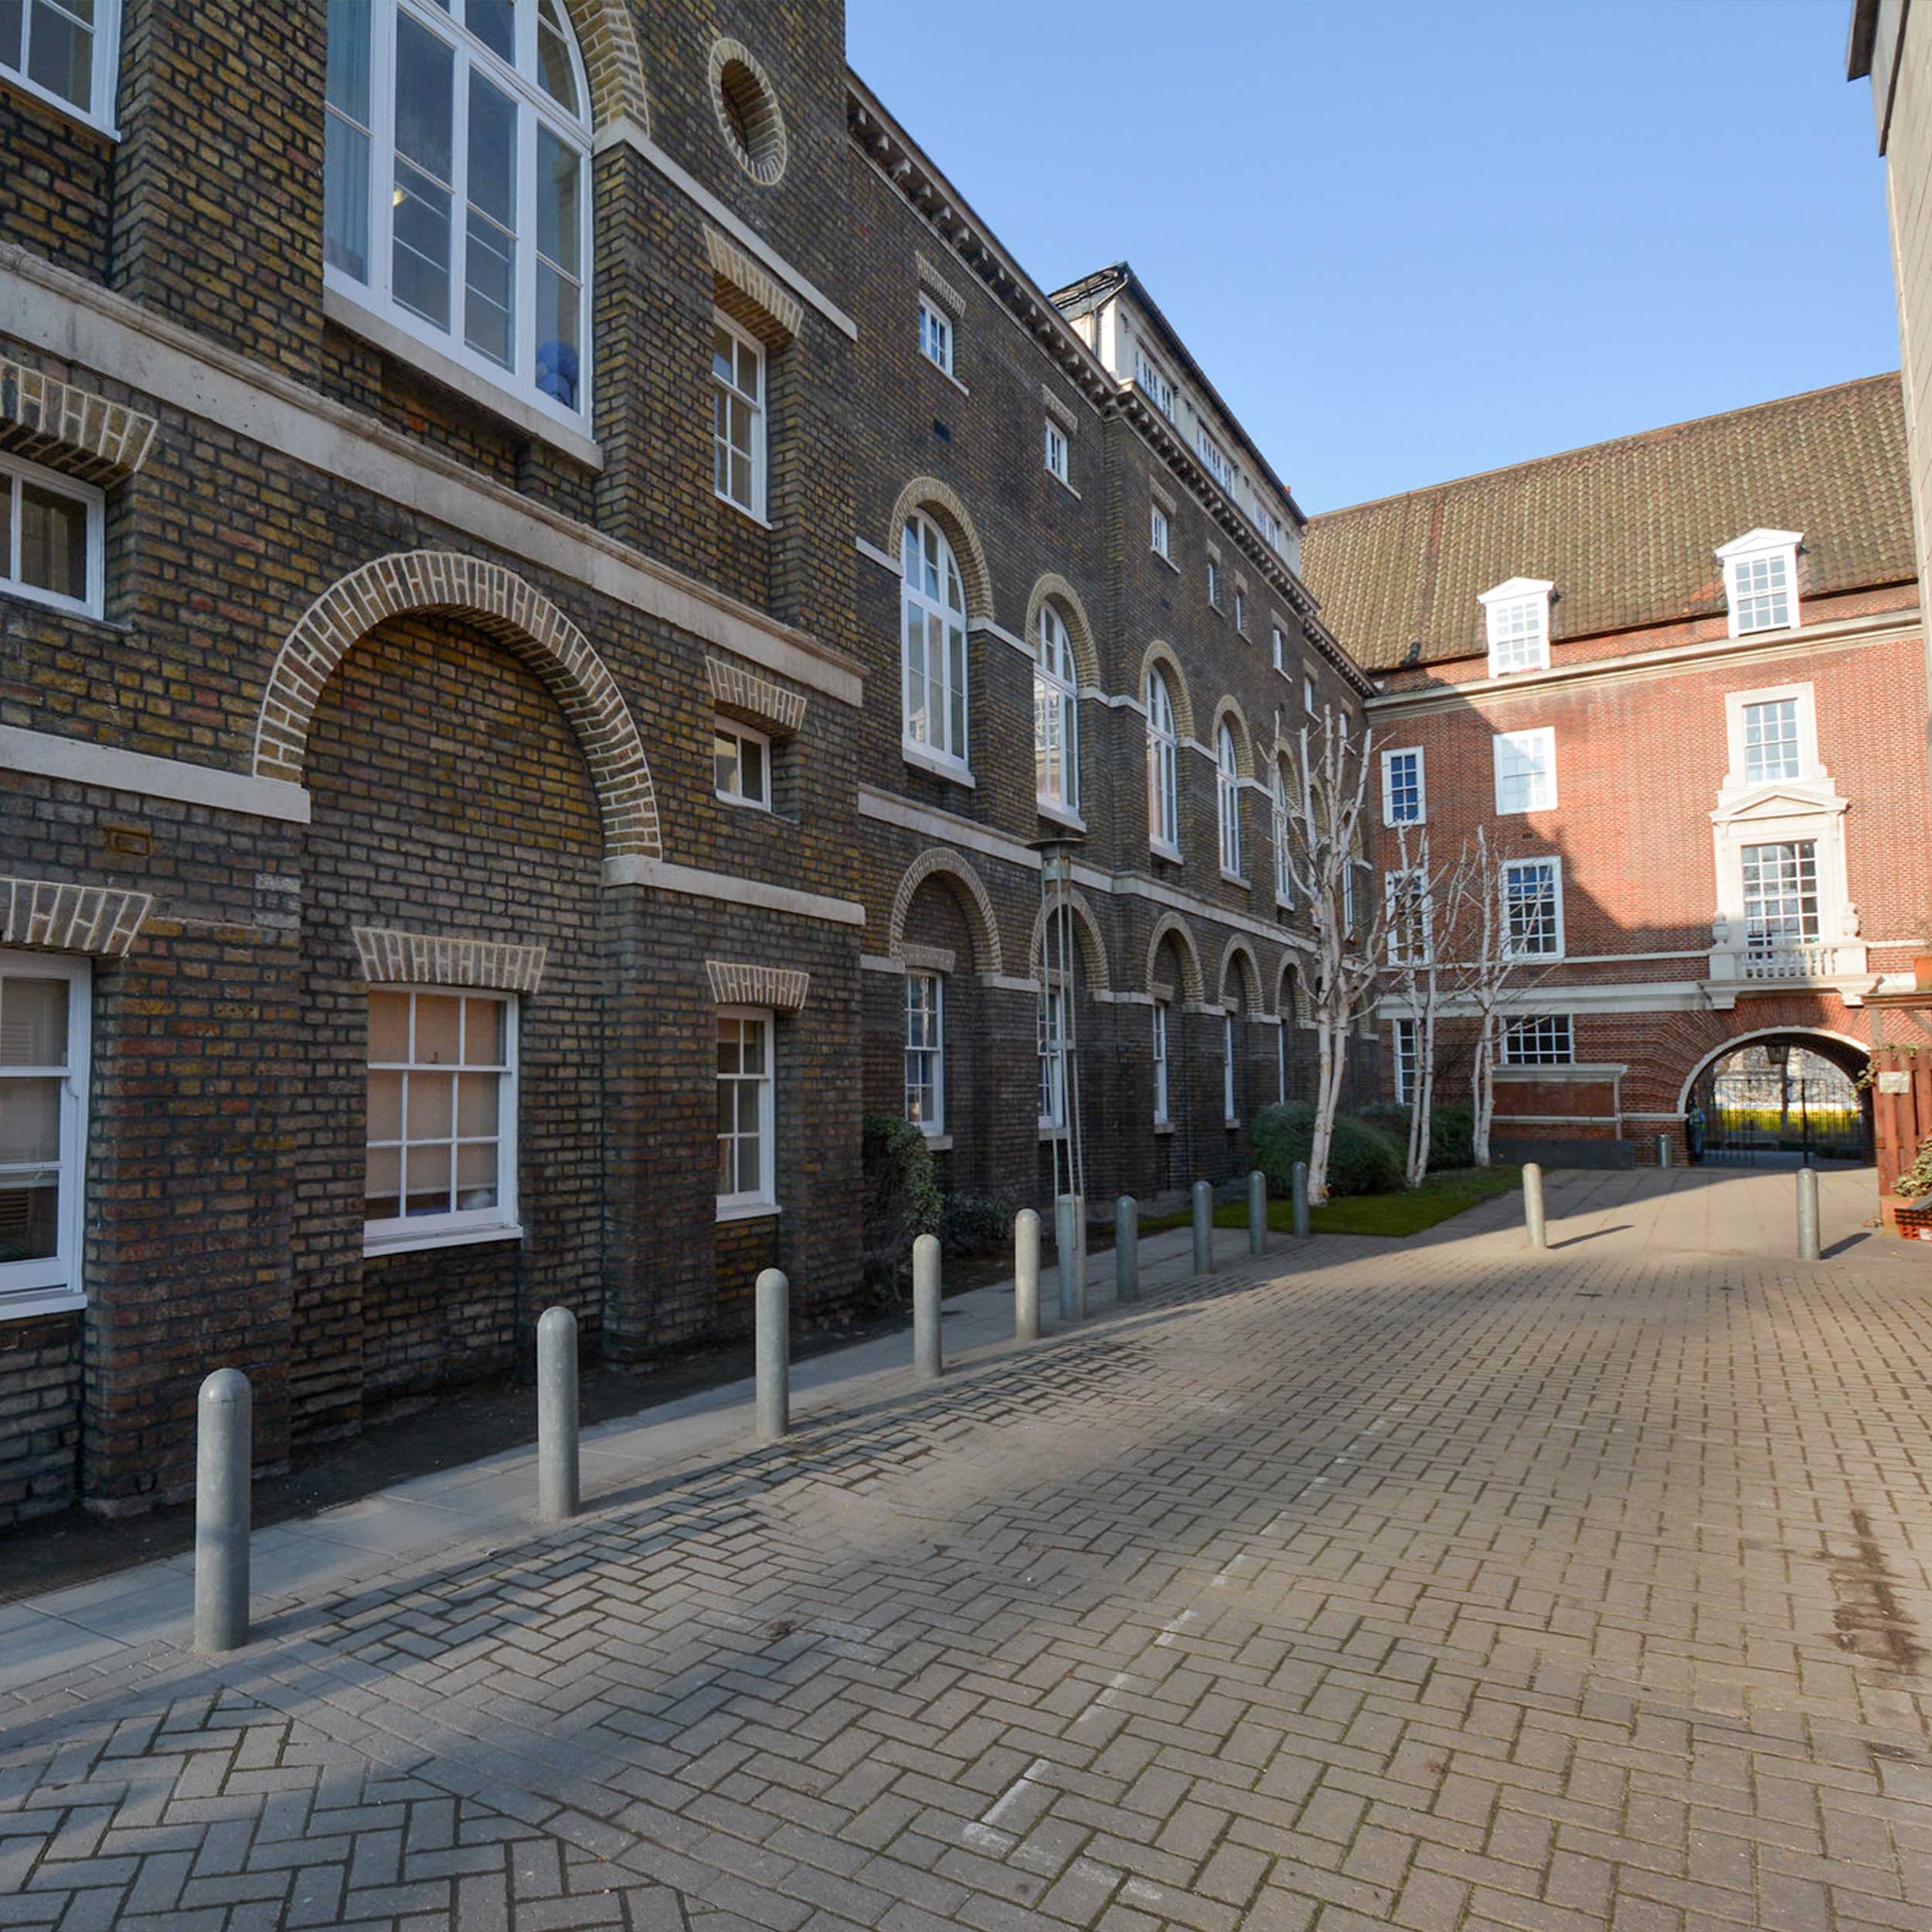 a street inside greenwich university that leads to an archway axis europe carried out works at the university including refurbishment